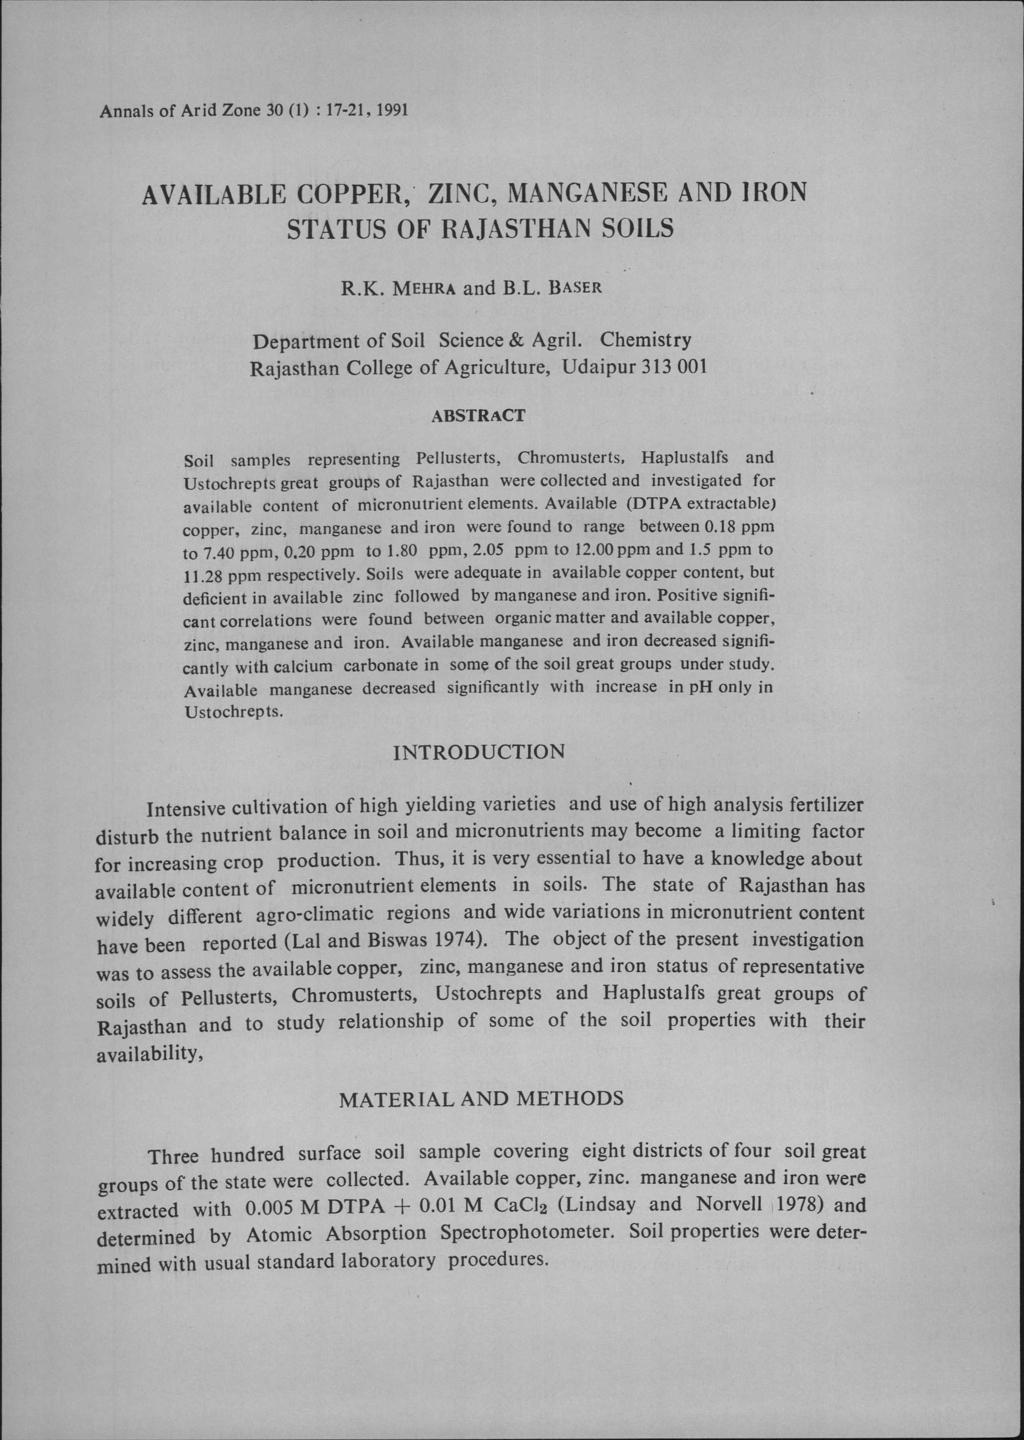 Annals f Arid Zne 30 (I) : 17-21, 1991 AVAILABLE COPPER, ZINC, ANGANESE AND I RON STATUS OF RAJASTHAN SOILS R.K. EHRA and B.L. BASER Department f Sil Science & Agril.